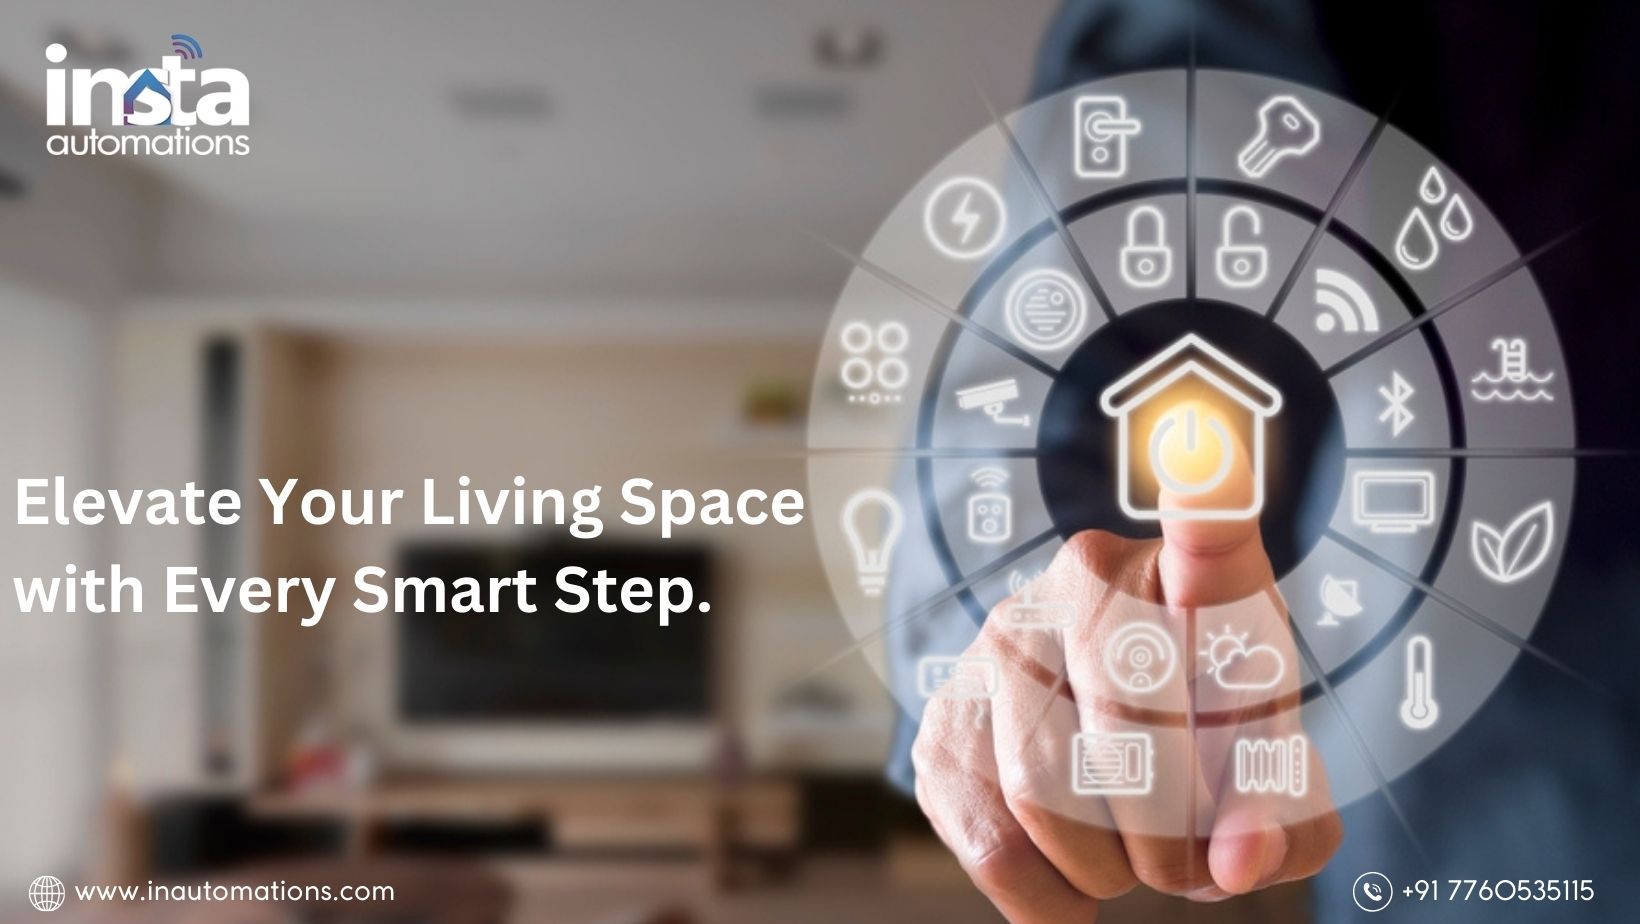 Revolutionize Your Living Space: Effortlessly Control Your Smart Home Using Mobile App